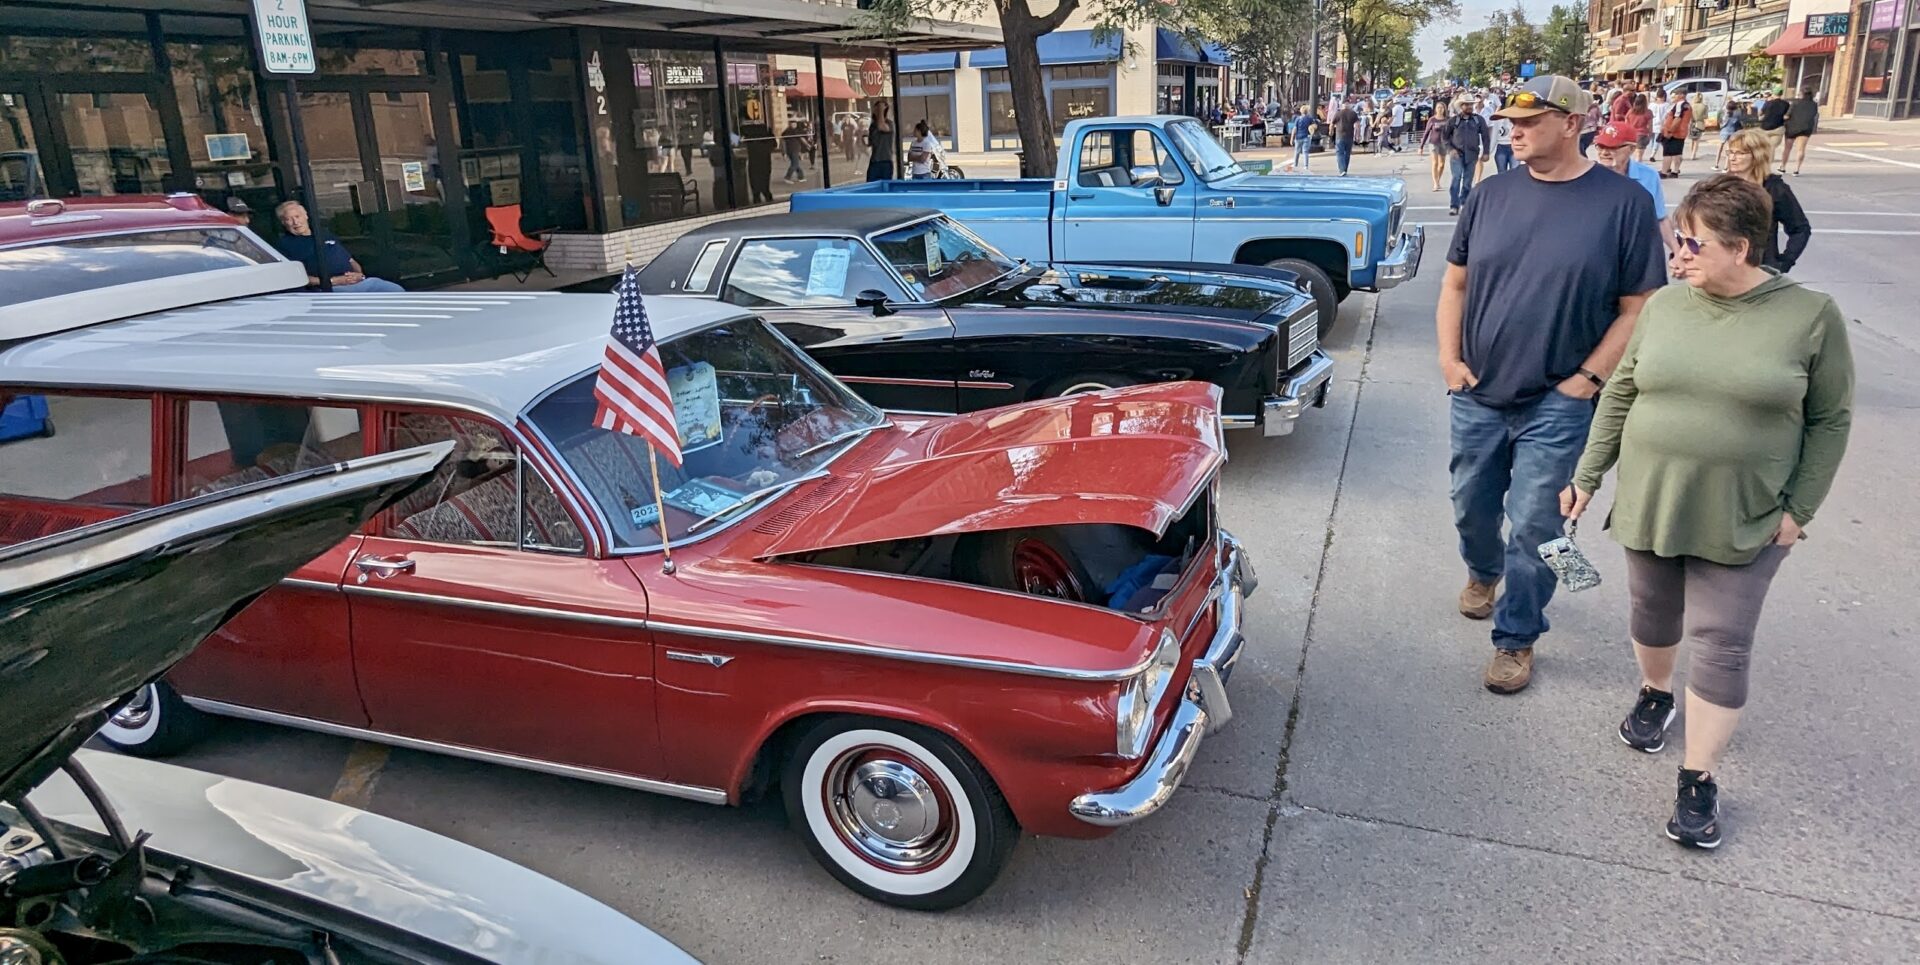 Vehicles of all sorts were on display in downtown Aberdeen the evening of Saturday, Aug. 26 as part of the Sizzlin' Summer Nights car and bike show. Aberdeen Insider photo by Scott Waltman